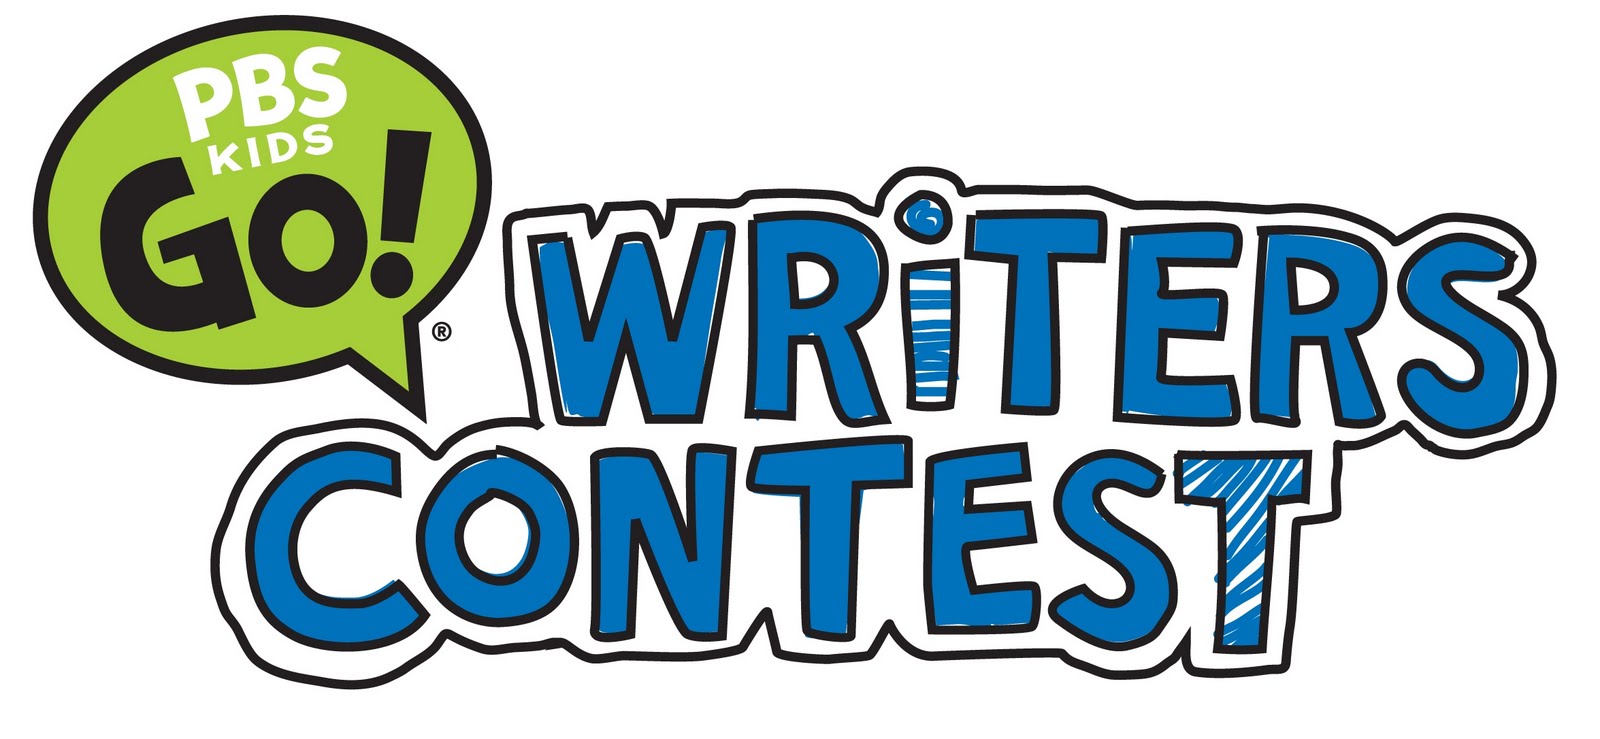 My Girls Have Been Asking To Enter The Pbs Kids Writers Contest